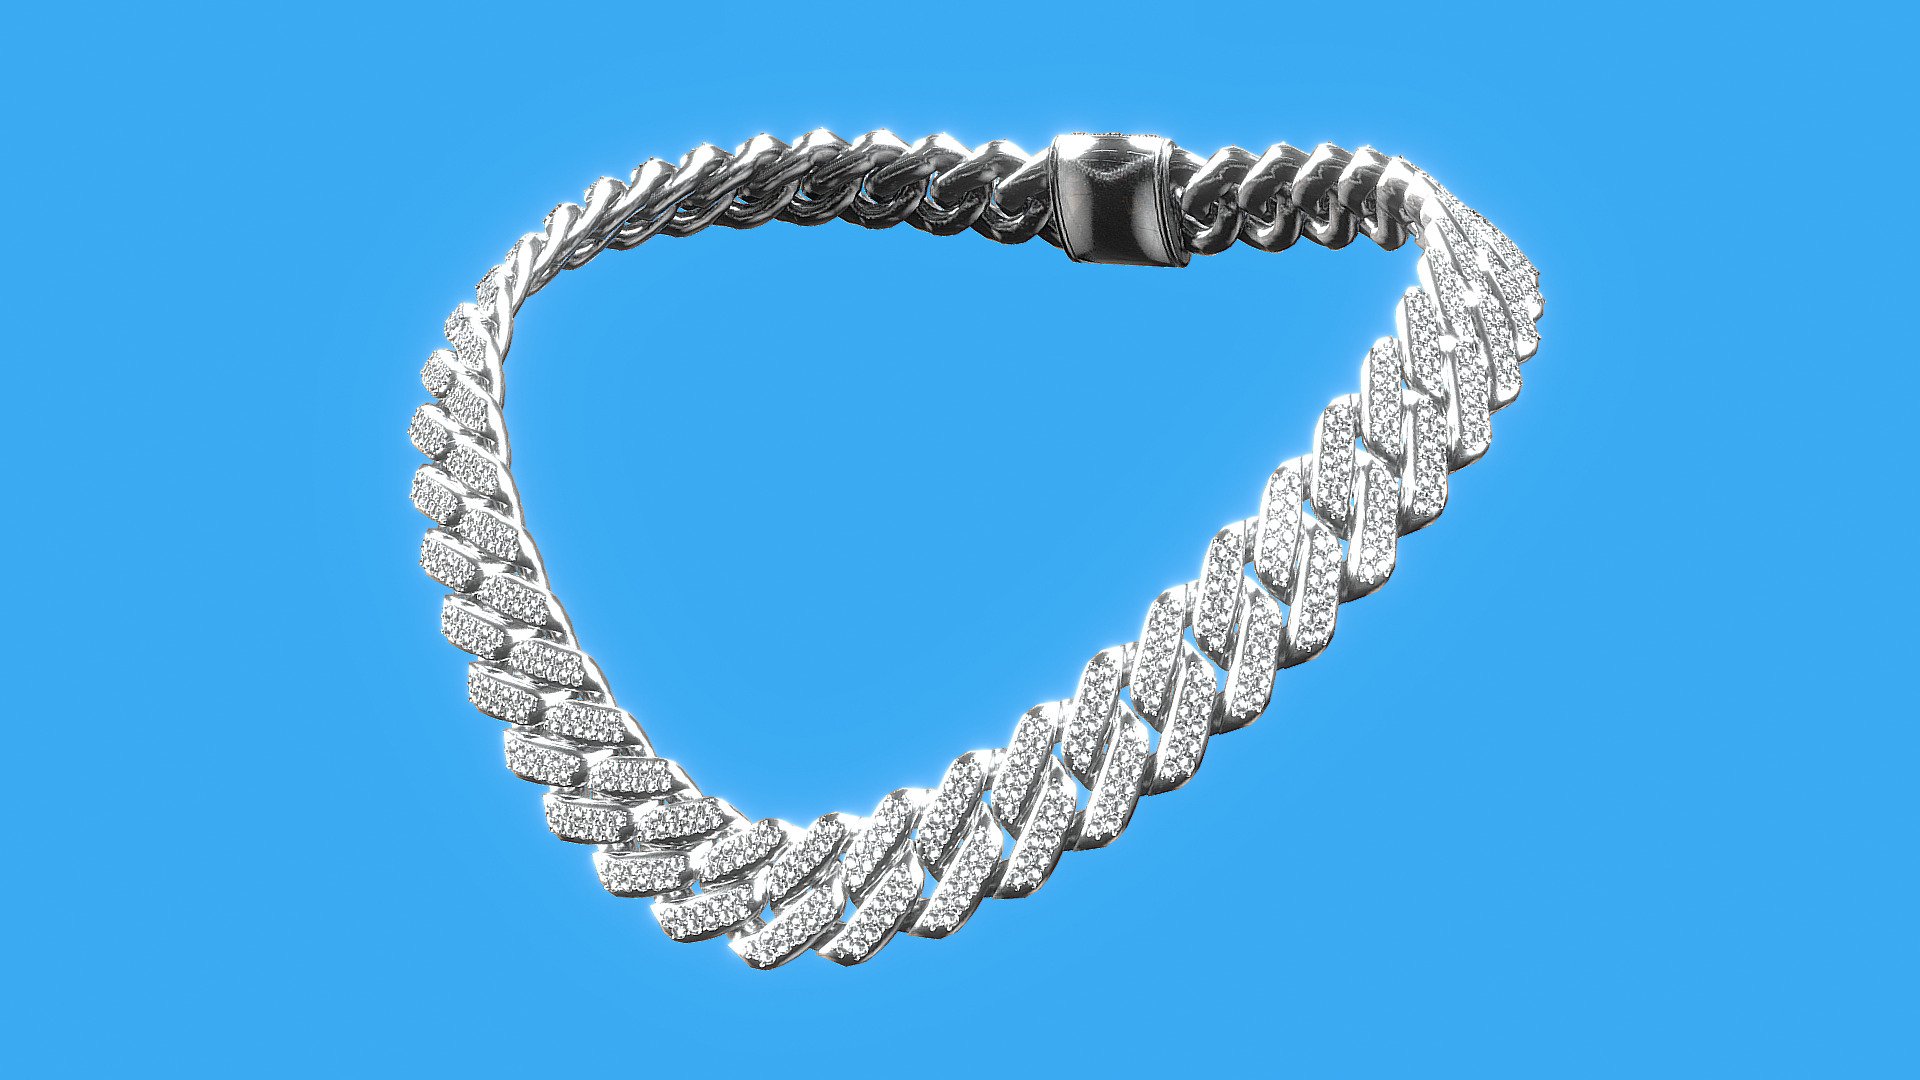 Cuban Chain 3D Model - Cuban Chain 3D Model - 3D model by 𝕽𝖊𝖆𝖑 𝕾𝖑𝖎𝖒 𝕾𝖍𝖆𝖉𝖞 (@real_slimshady) 3d model